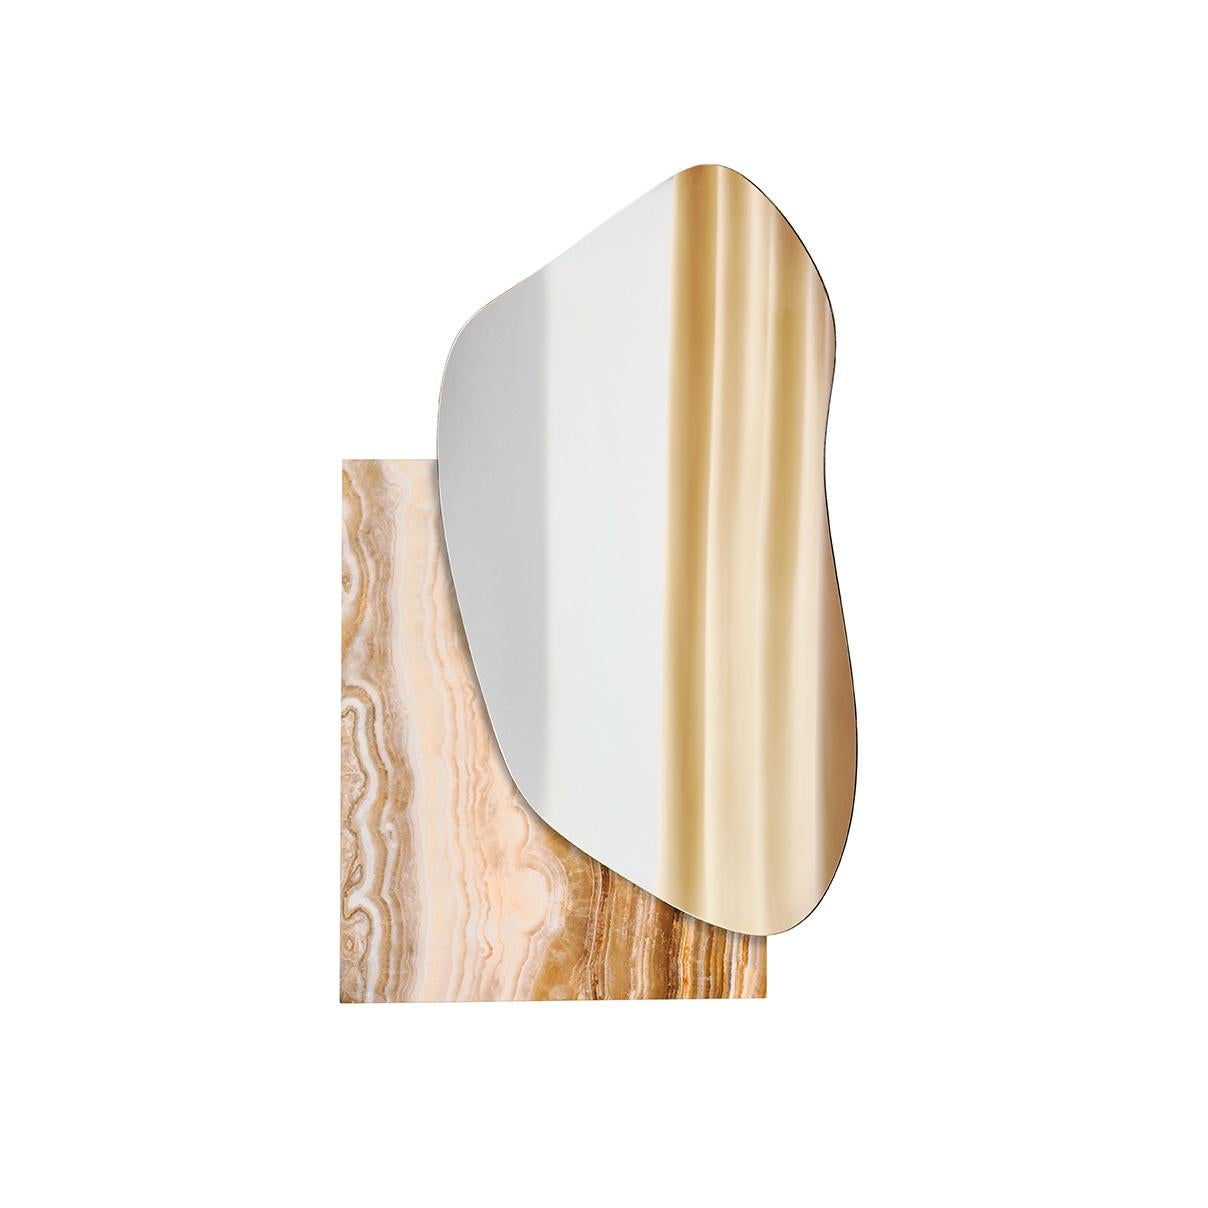 Ukrainian Modern Wall Mirror Lake 1 by Noom with White Marble Statuario Base